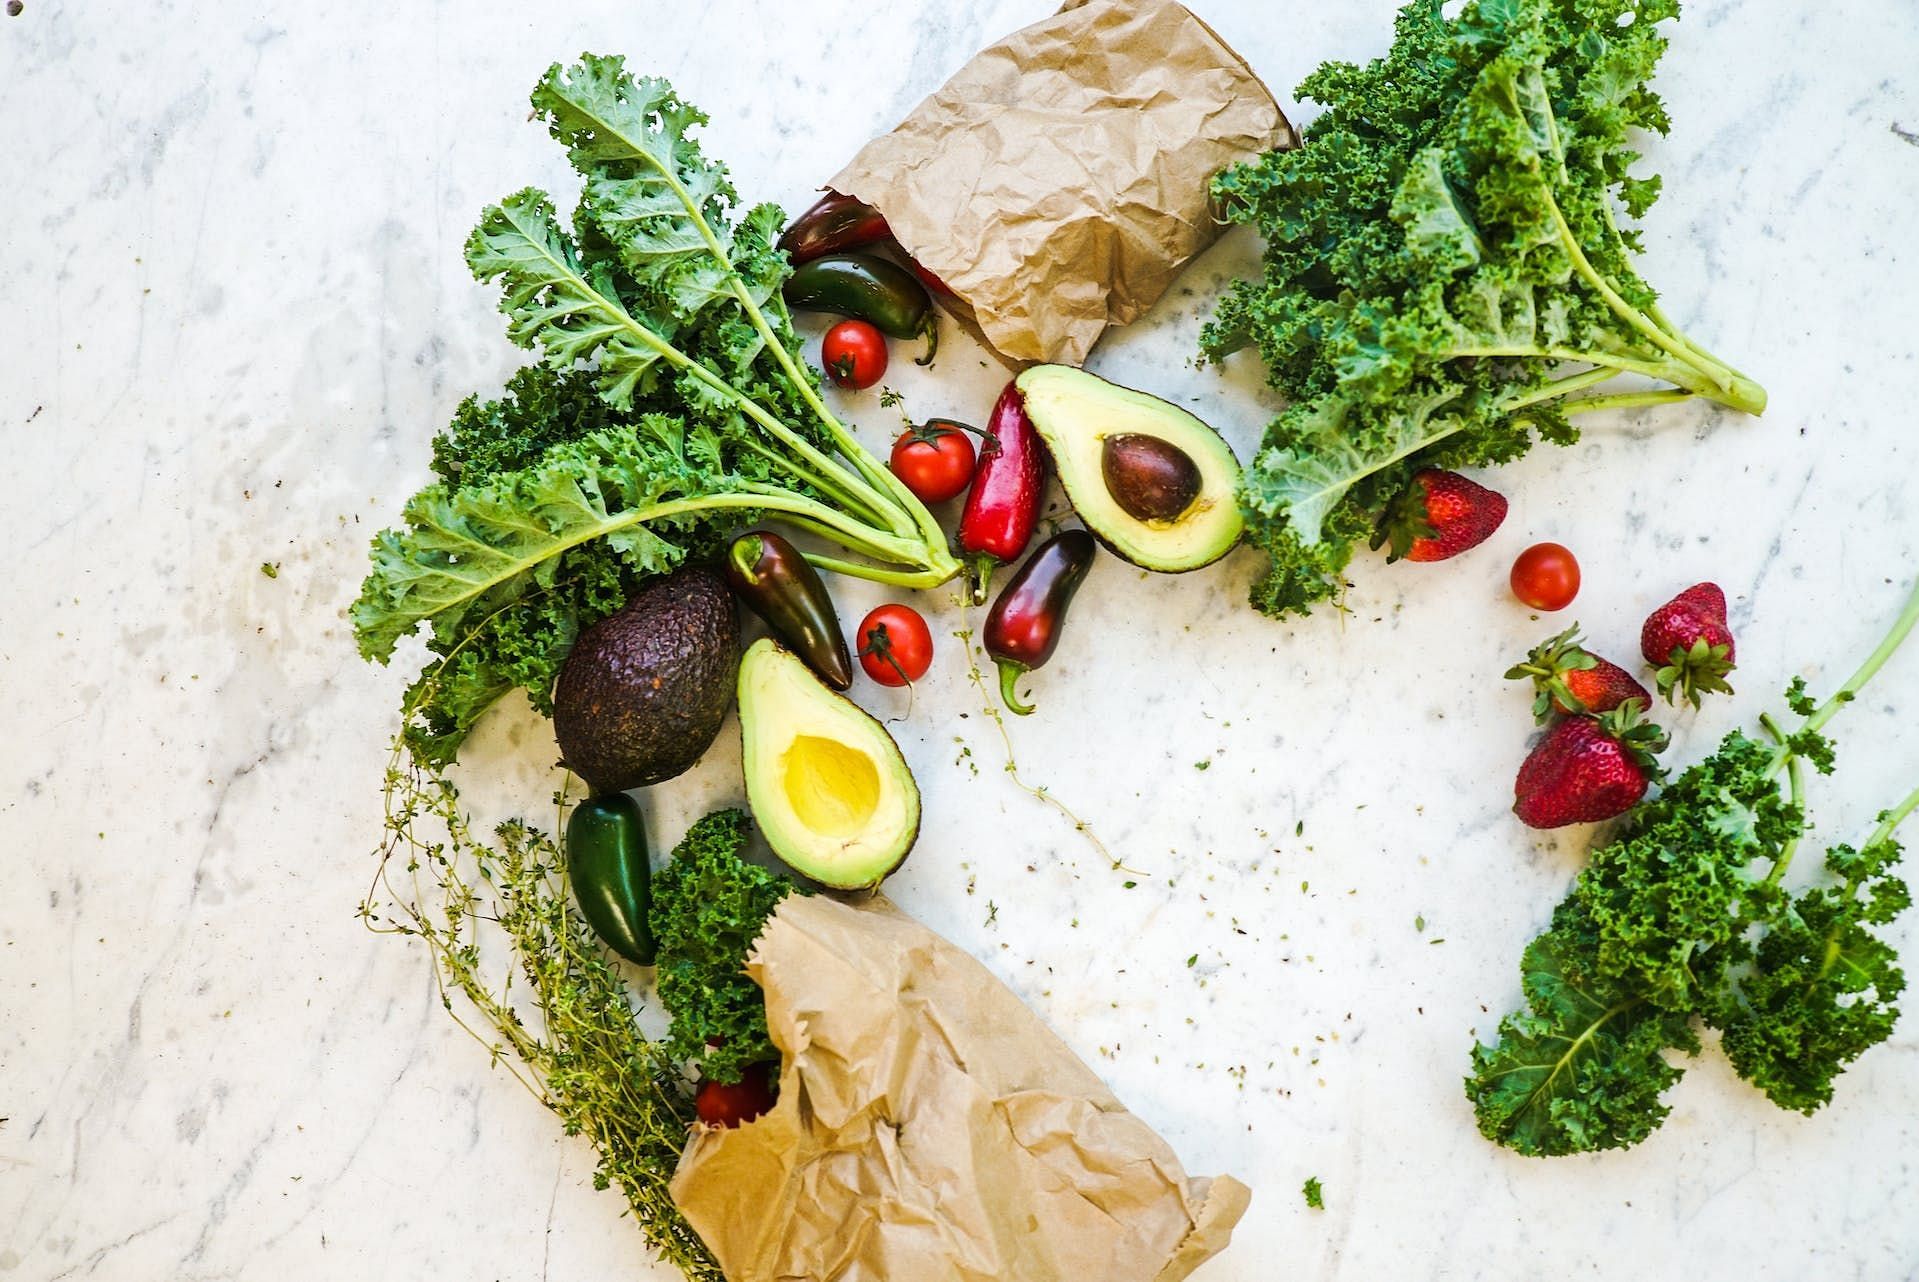 Eat right and healthy. (Image via Pexels/Wendy Wei)